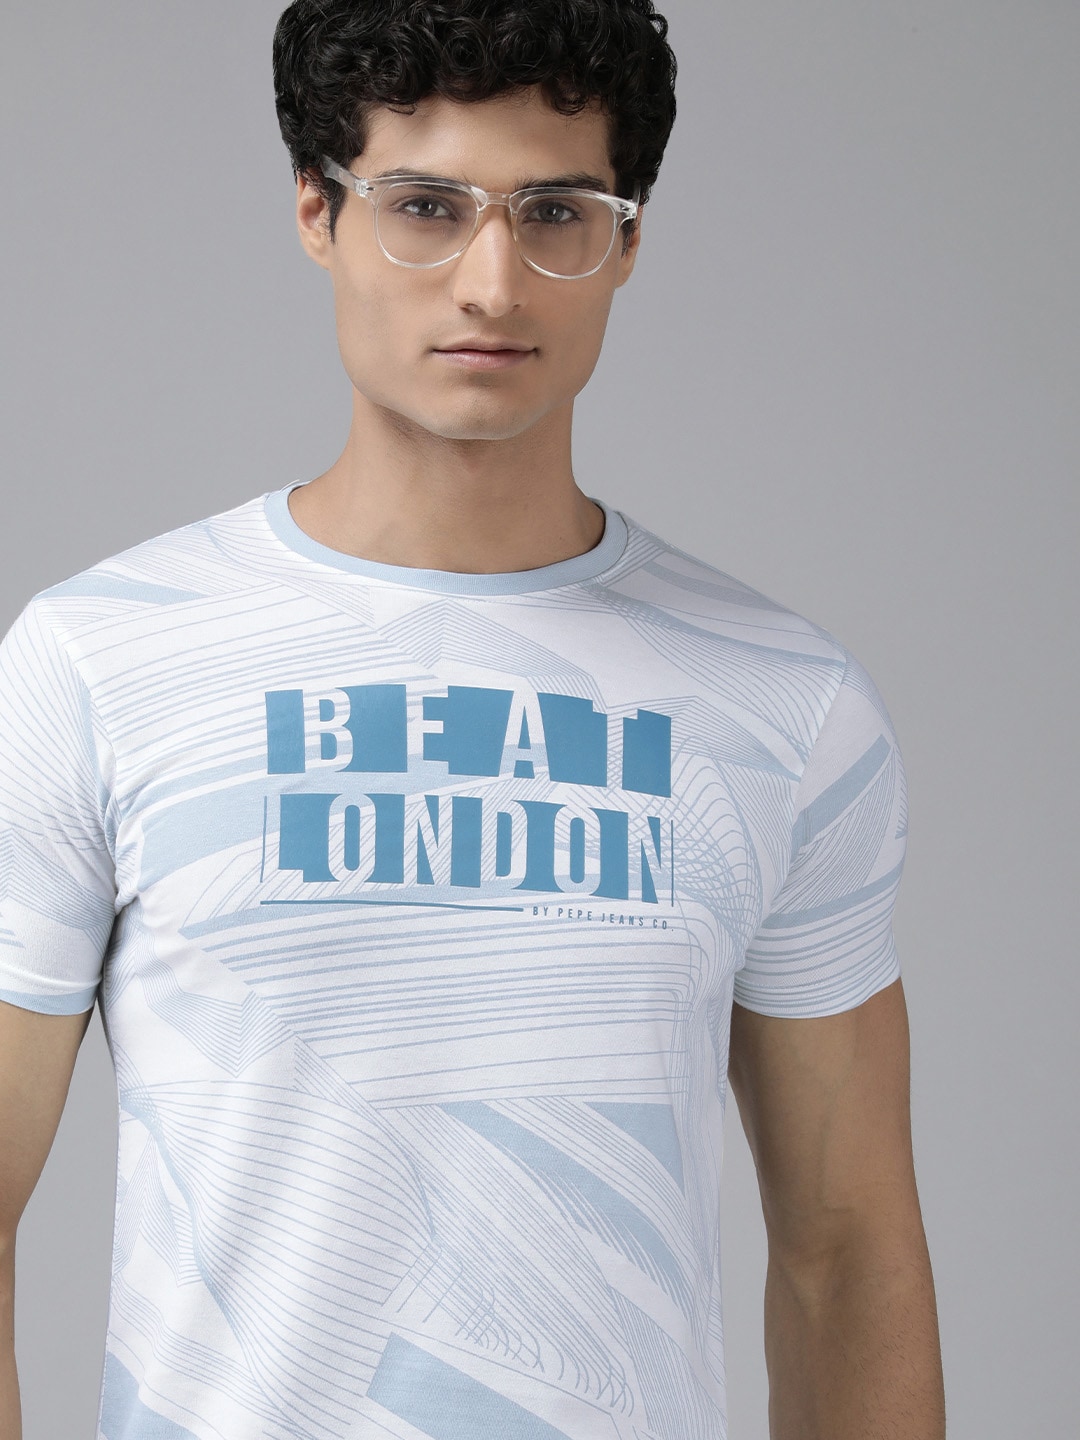 BEAT LONDON by PEPE JEANS Men Brand Logo Printed Pure Cotton T-shirt